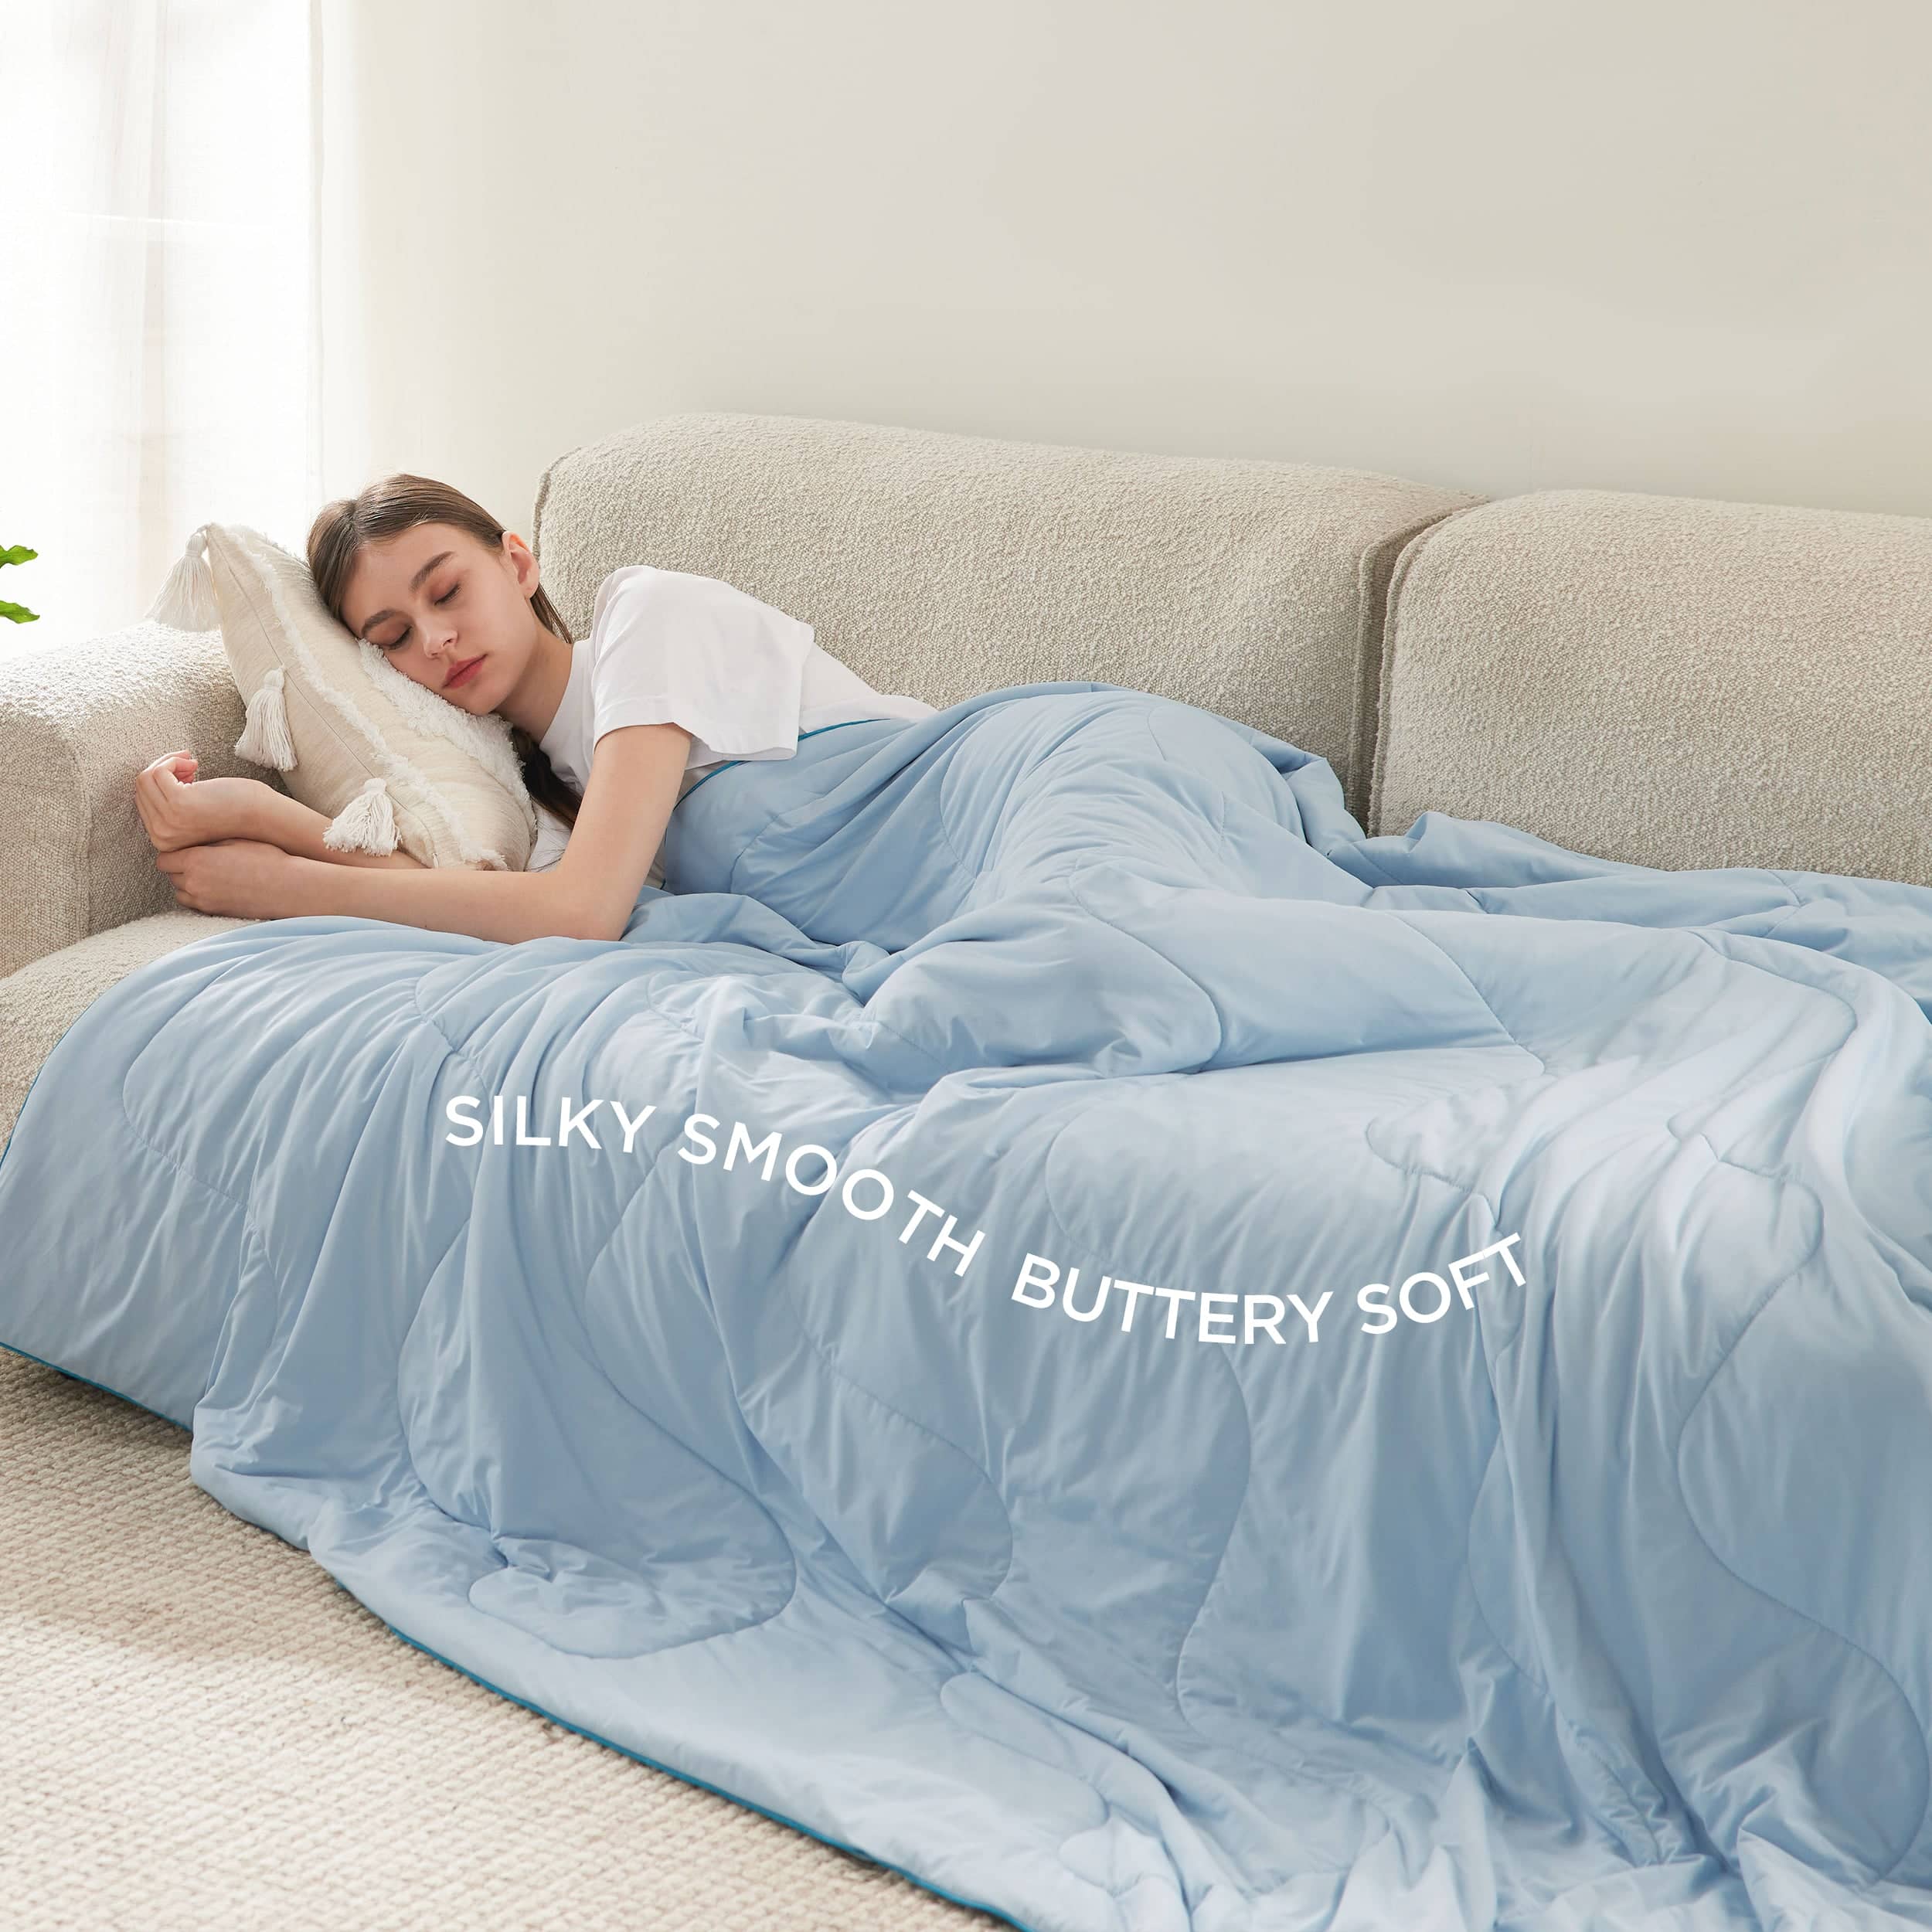 Bedsure Breescape Cooling Blankets for Hot Sleepers and Night Sweats